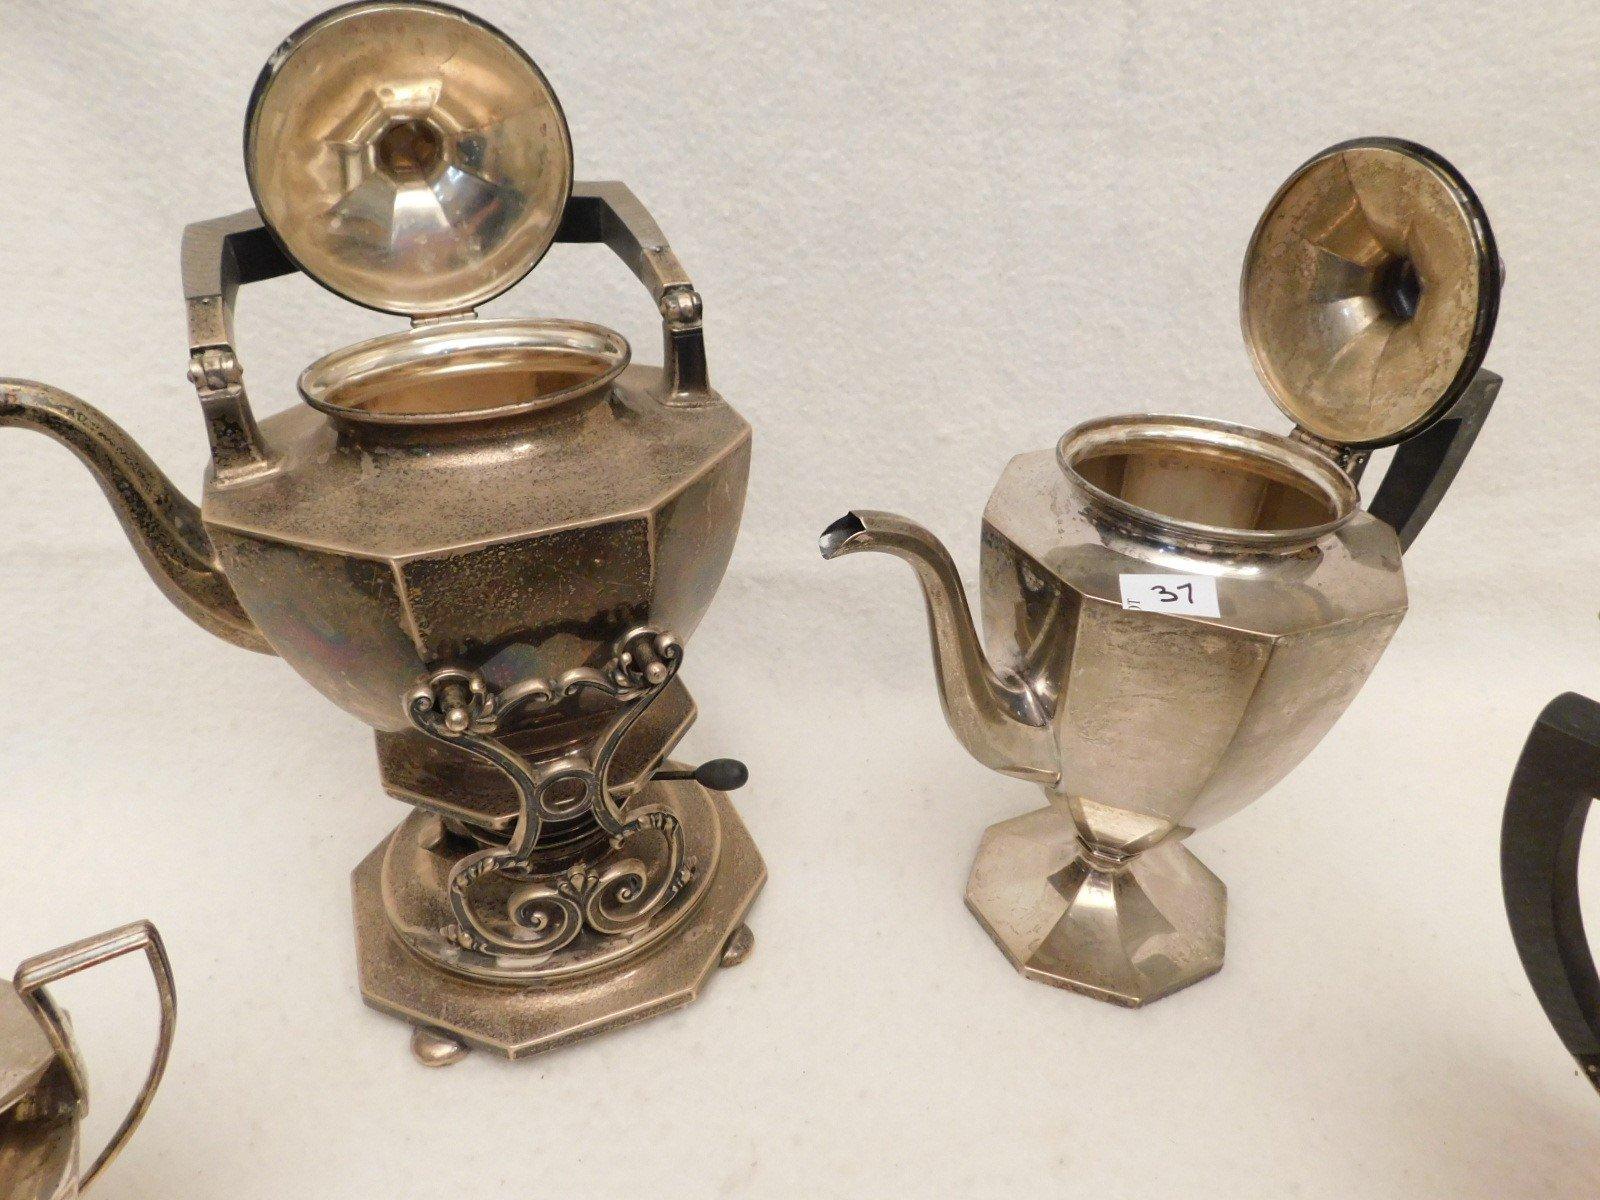 TEA SET, STERLING.   INCLUDES:  TEA/COFFEE POT ON WARMING STAND, 16.86 OZT,